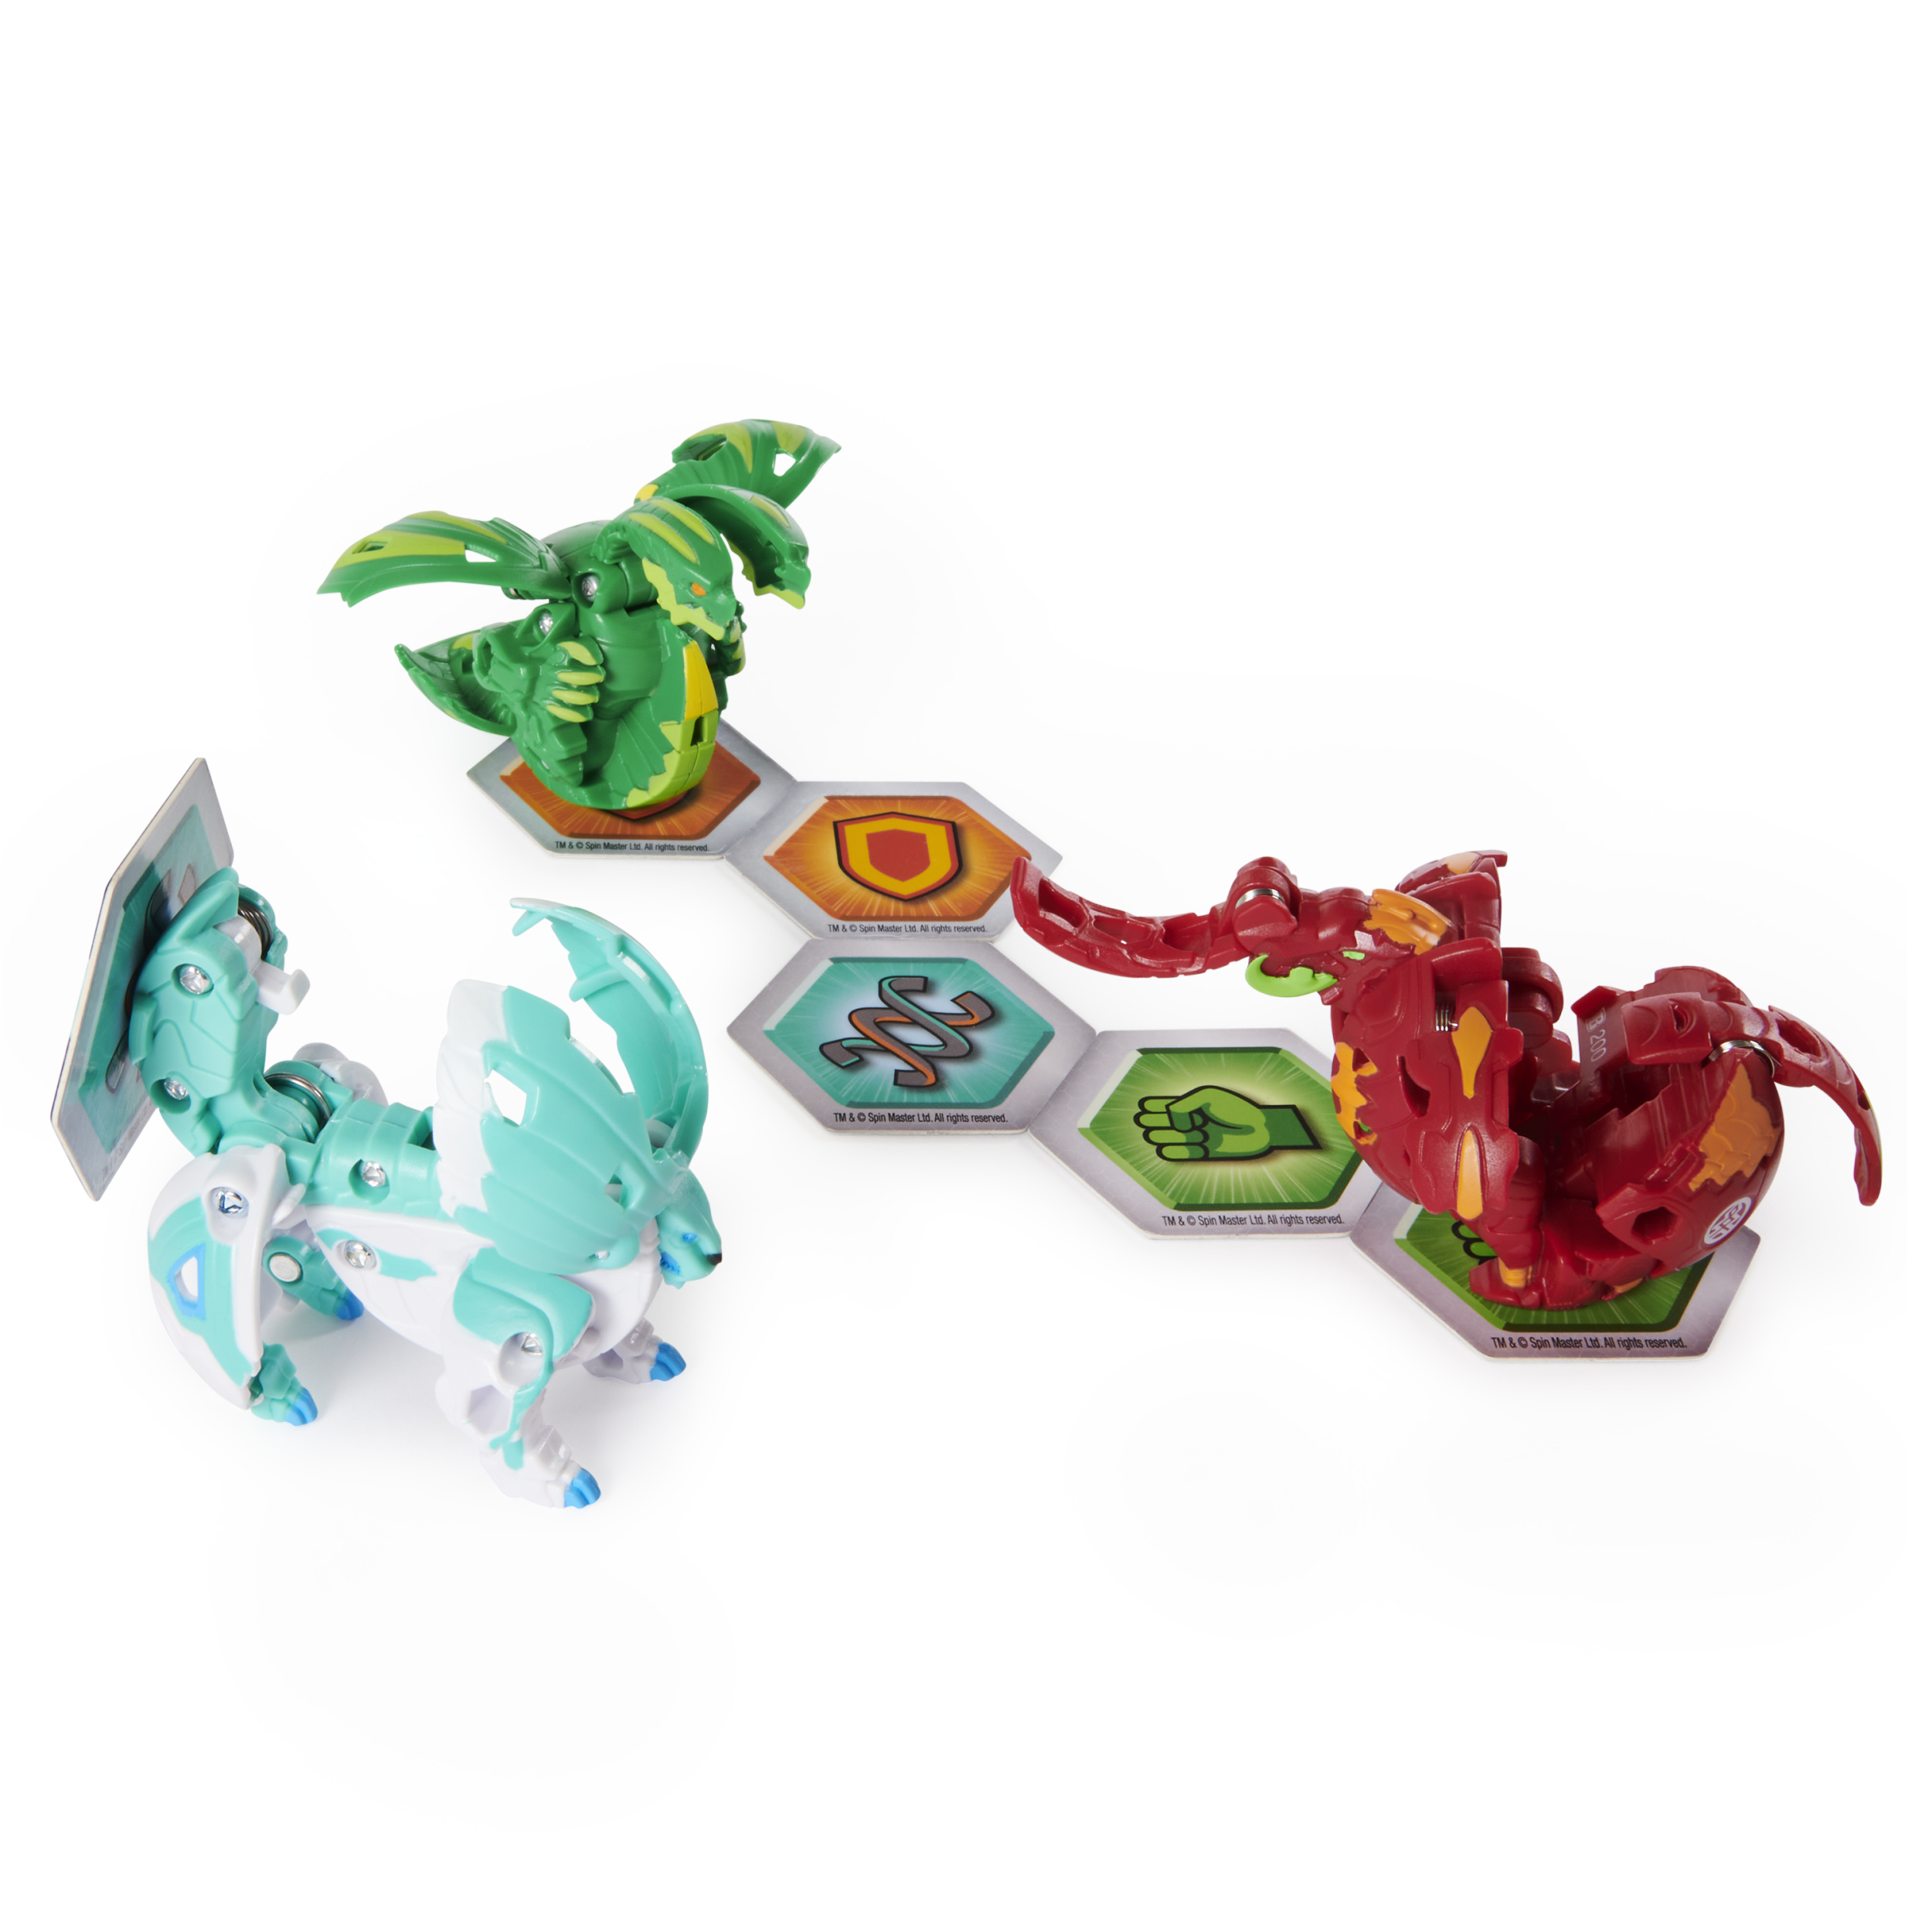 Bakugan Pro, Armored Elite Starter Set with Hydorous Ultra, 2 Bakugan and Collectible Trading Cards - image 3 of 5